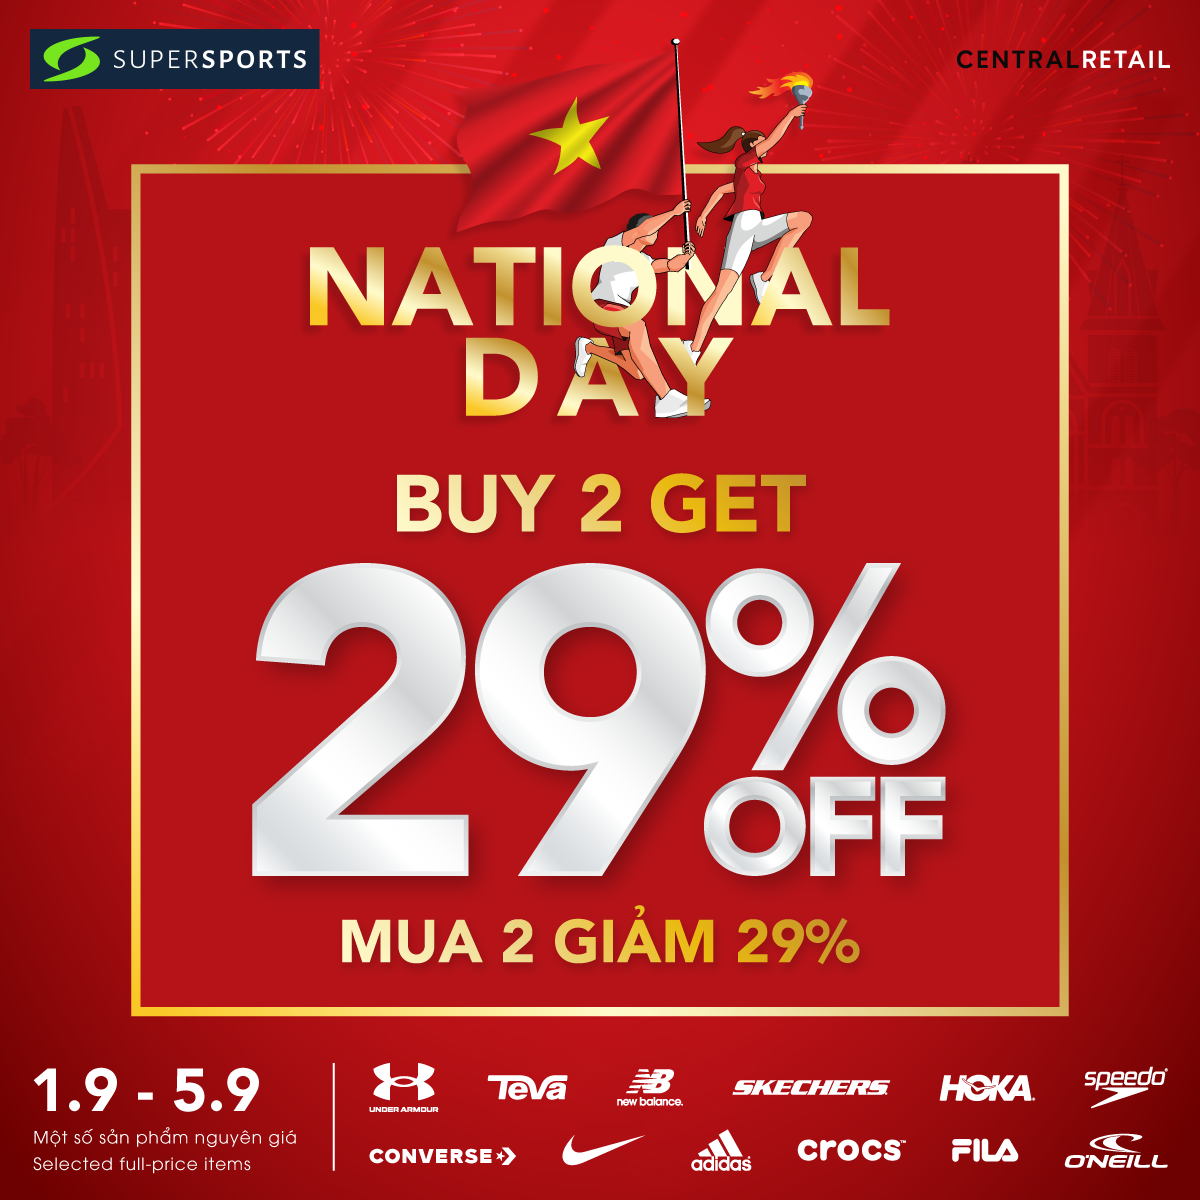 CELEBRATE NATIONAL DAY - GET MANY DEALS FROM SUPERSPORTS